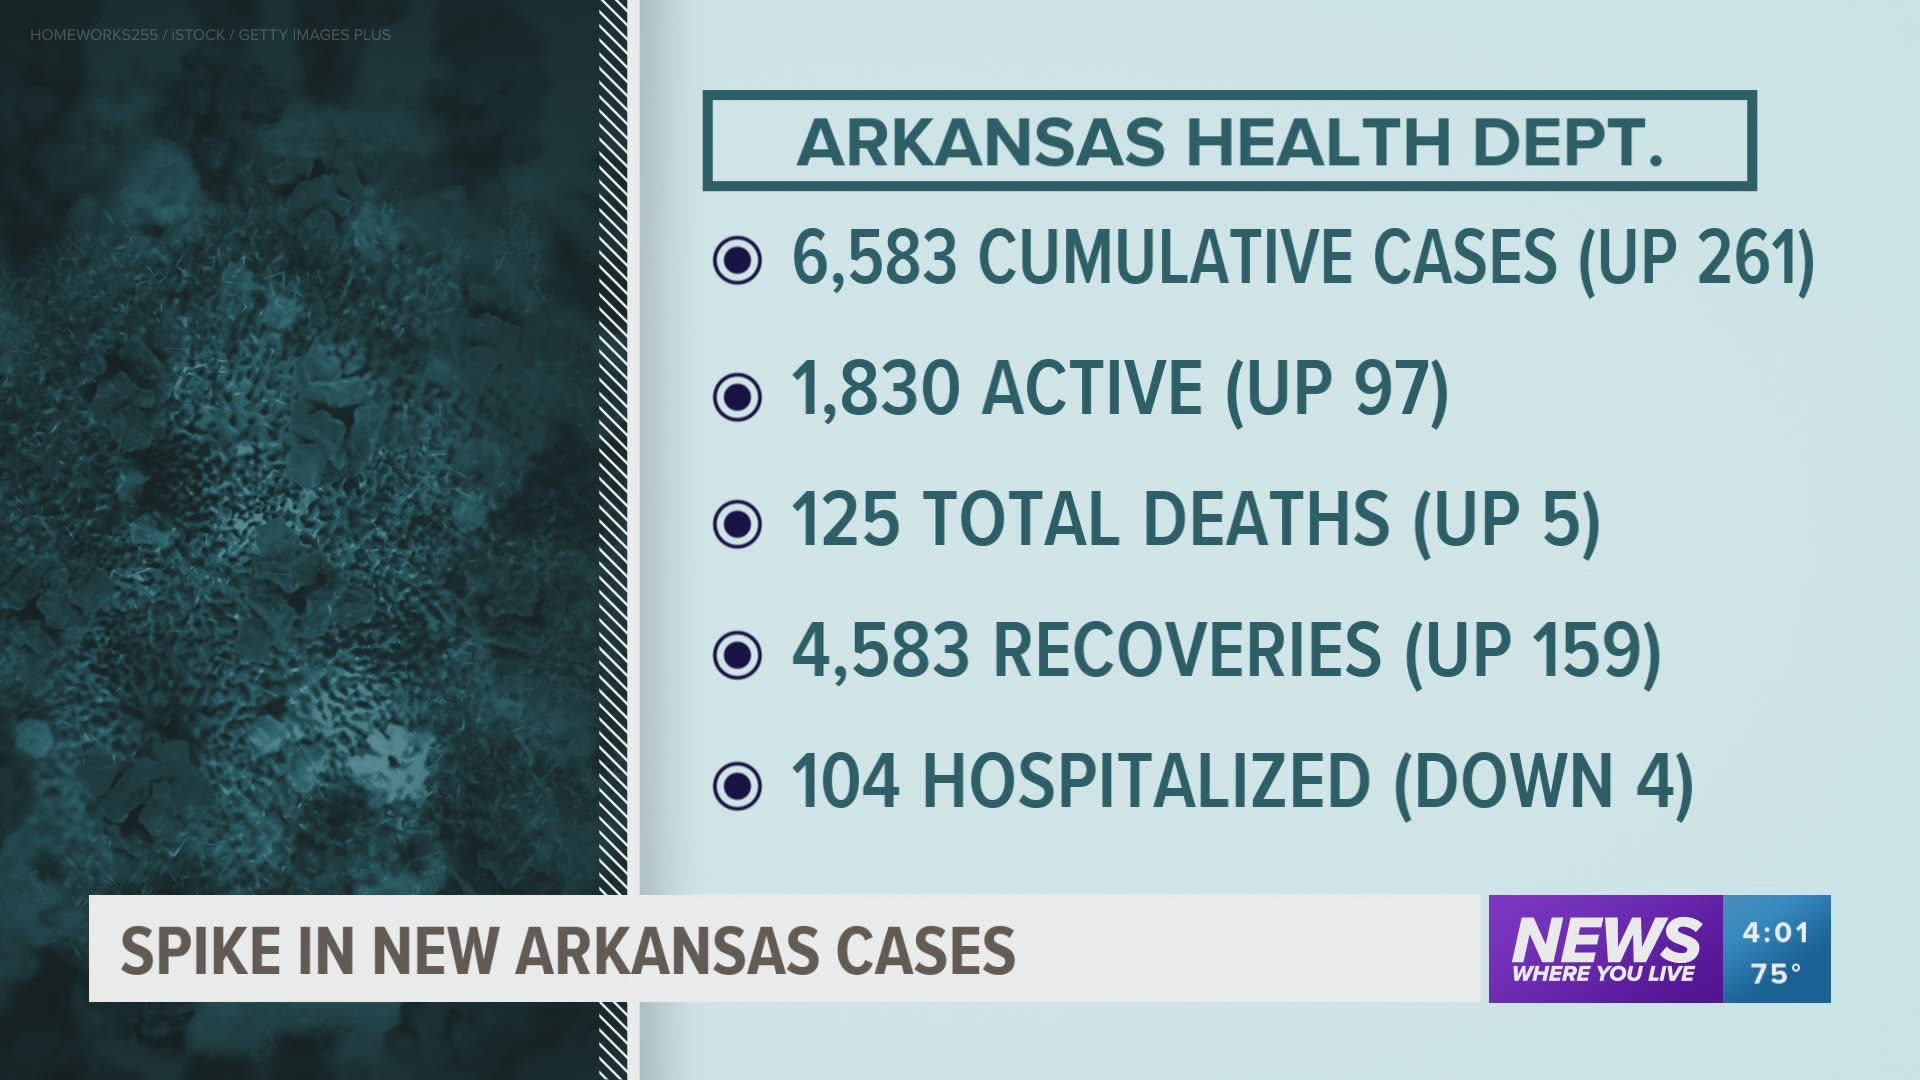 Arkansas sees spike in new COVID-19 cases